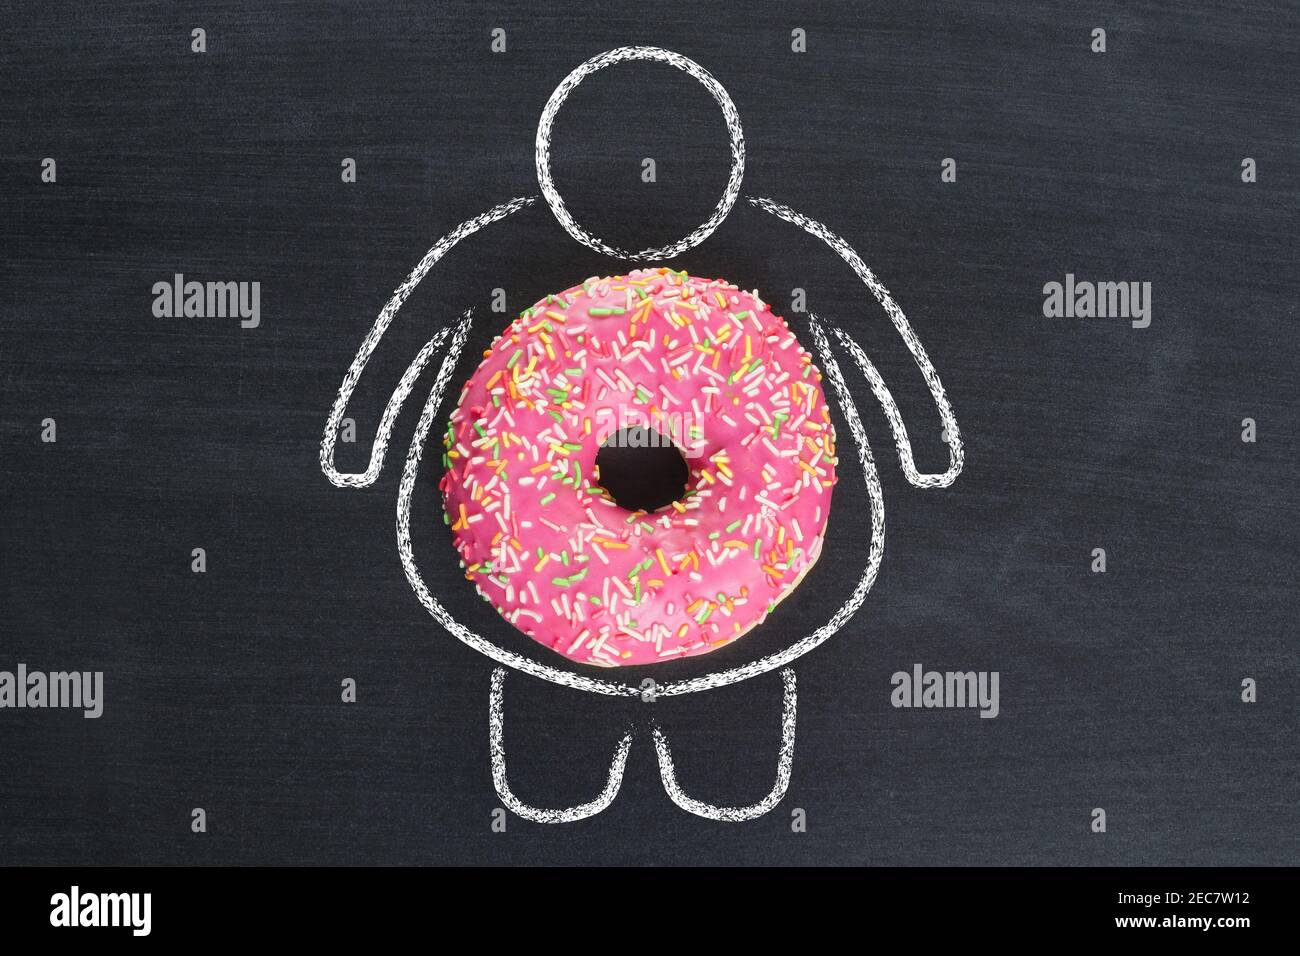 Unhealthy eating habits. Silhouette with overweight and donut as unhealthy eating concept Stock Photo